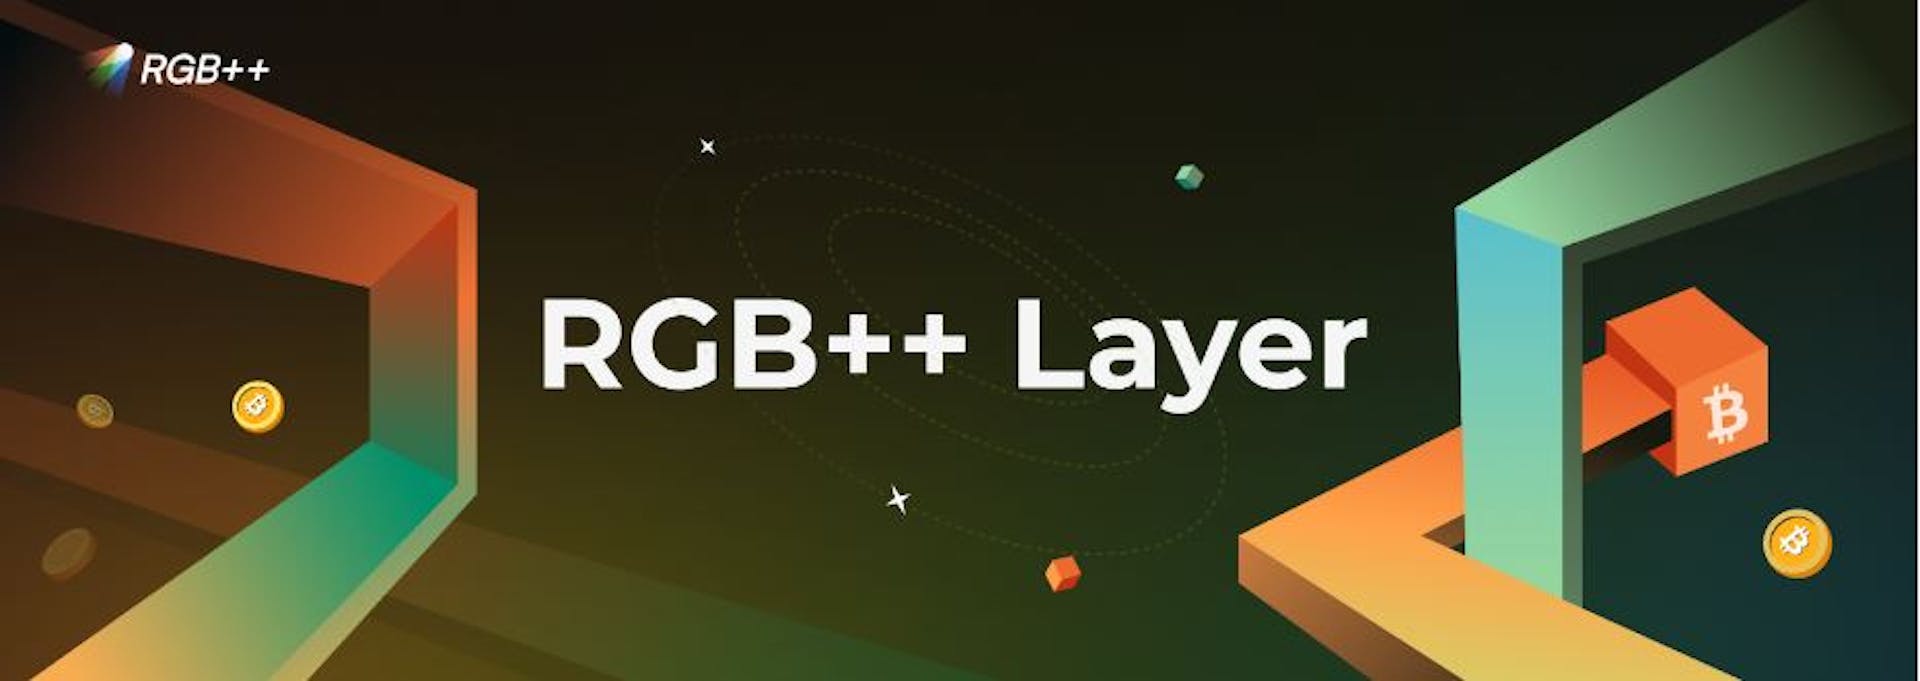 featured image - RGB++ Layer: Transforming Bitcoin with Asset Issuance, Smart Contracts, and Interoperability